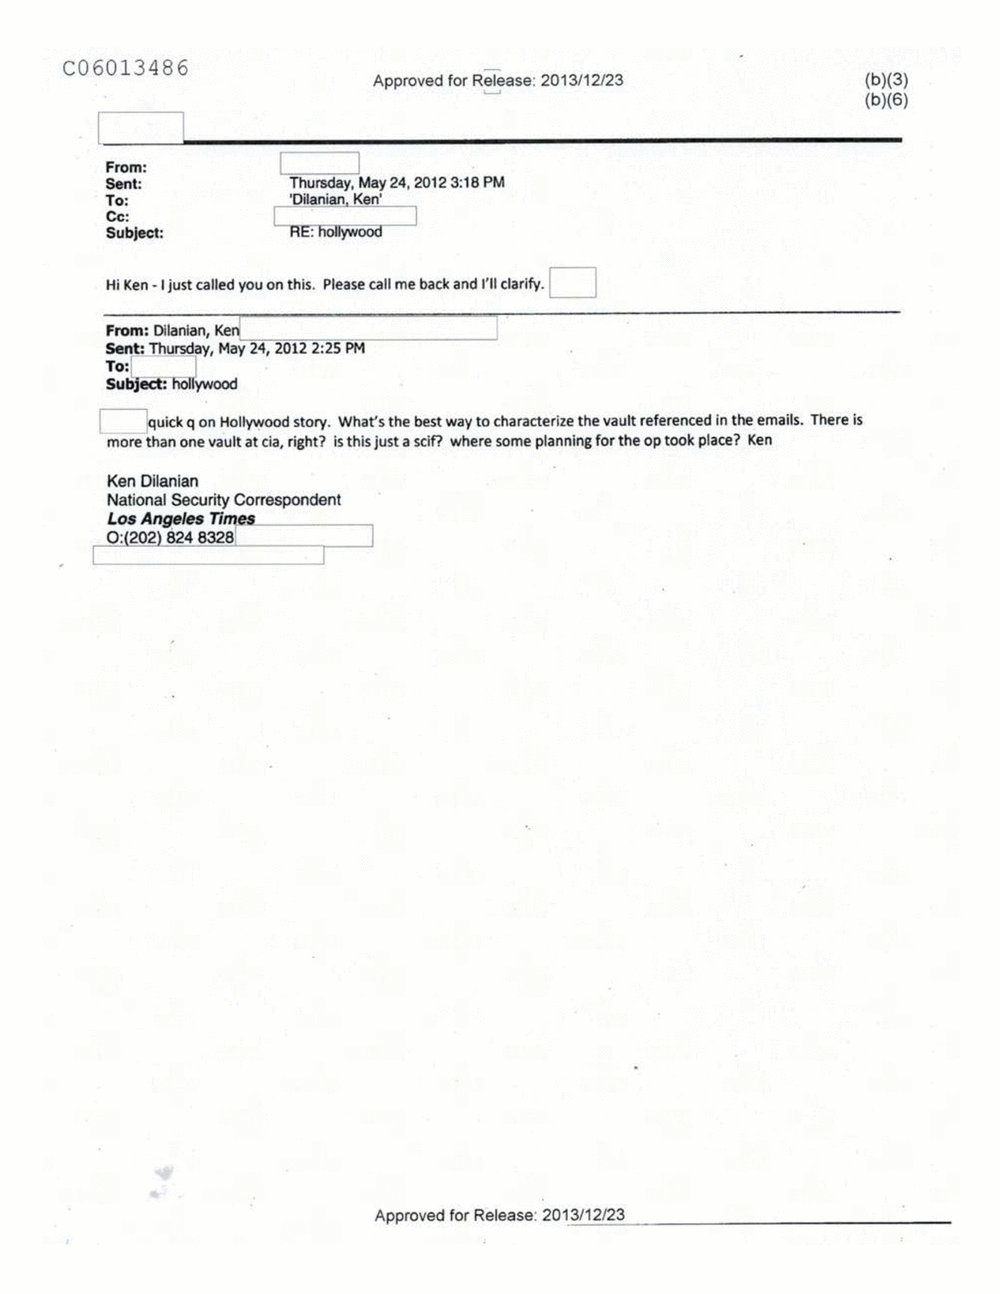 Page 333 from Email Correspondence Between Reporters and CIA Flacks